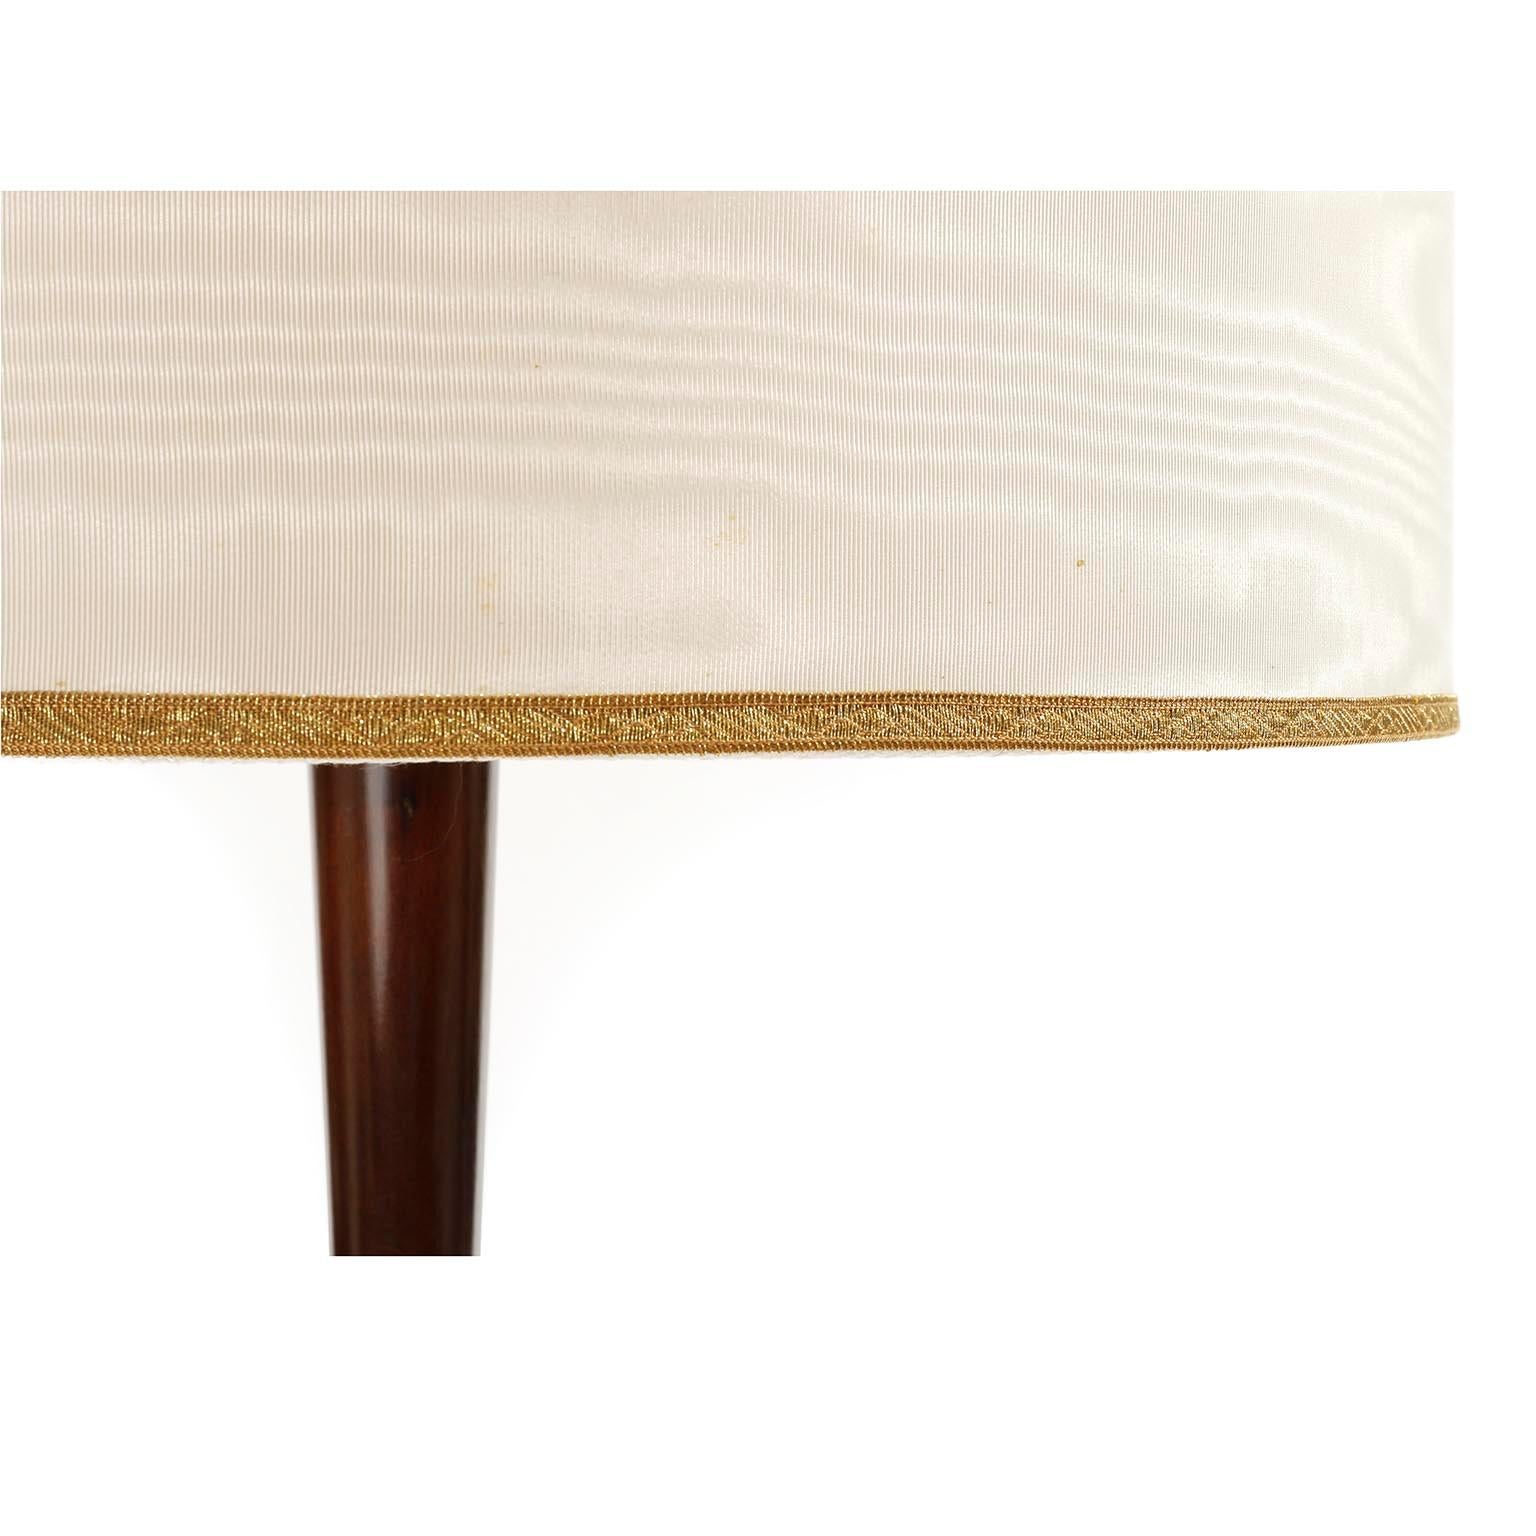 Floor Lamp by Stilnovo, Stained Walnut Brass Marble Base, circa 1946-48 For Sale 4